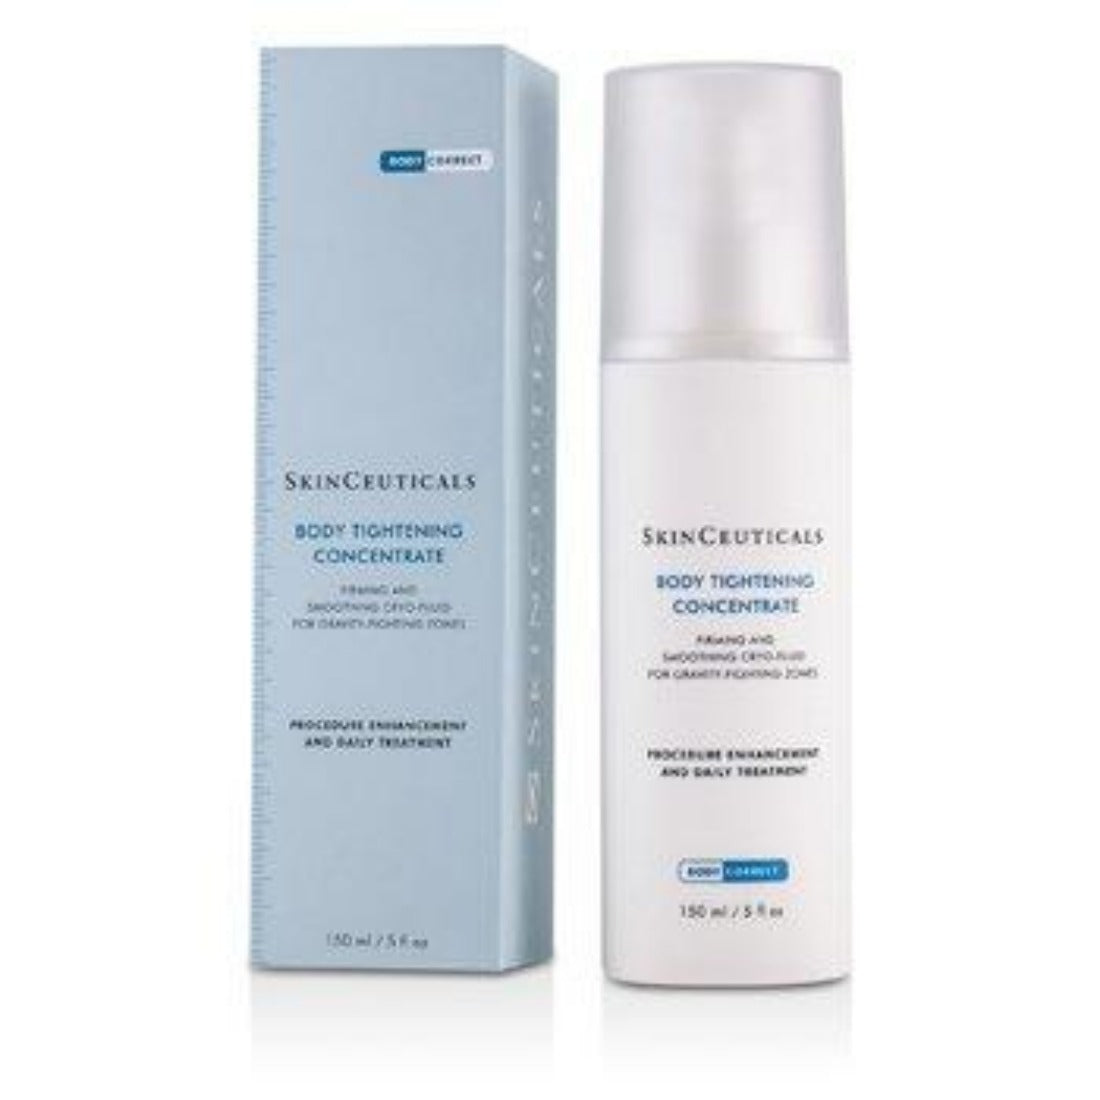 Skinceuticals Body Tightening Concentrate 150 mL